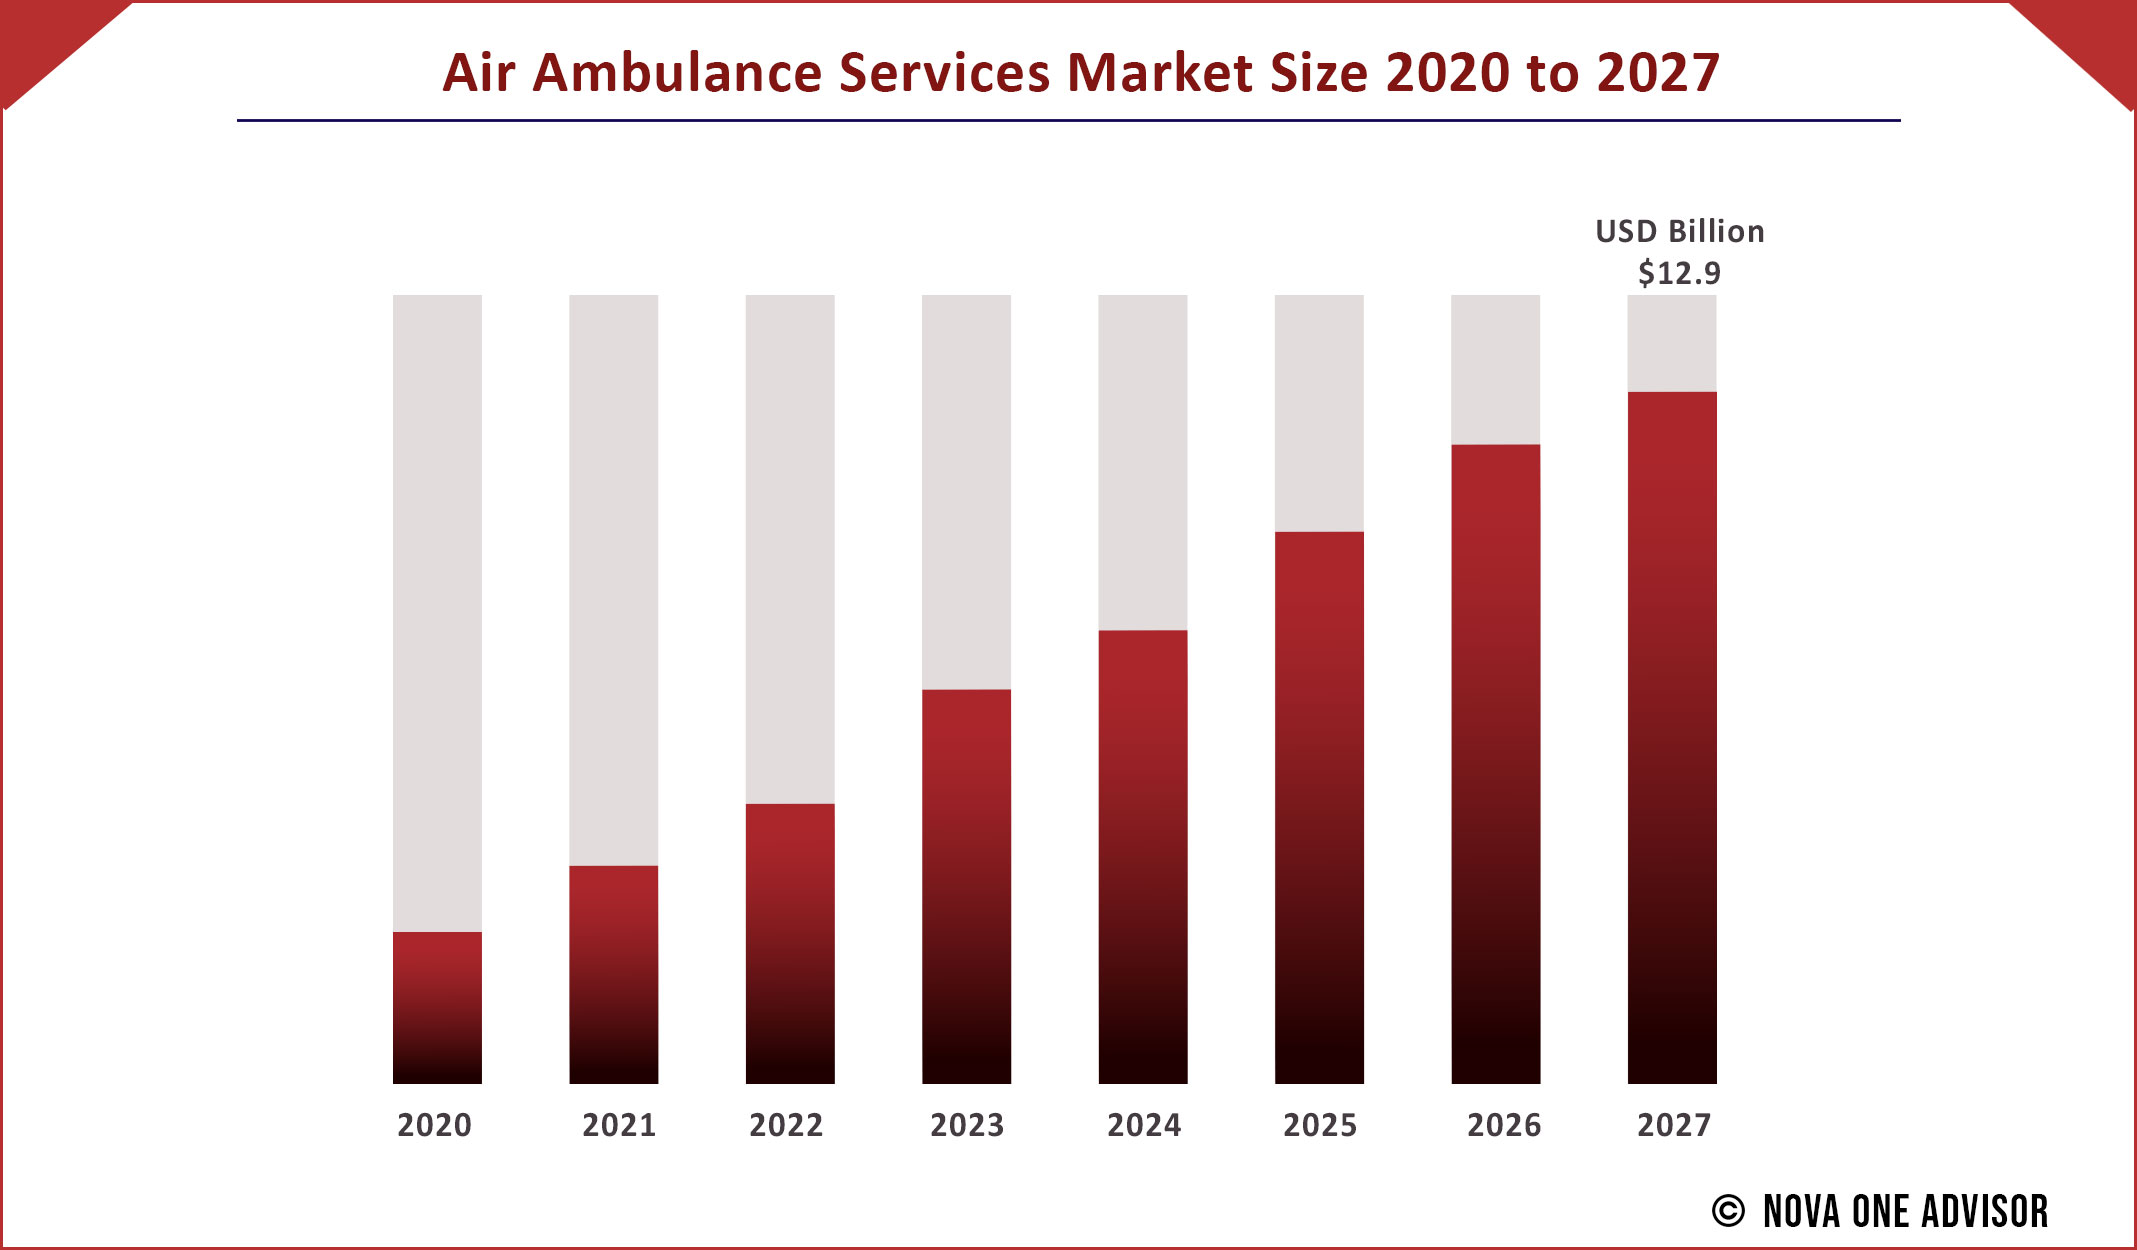 Air Ambulance Services Market Size 2020 to 2027